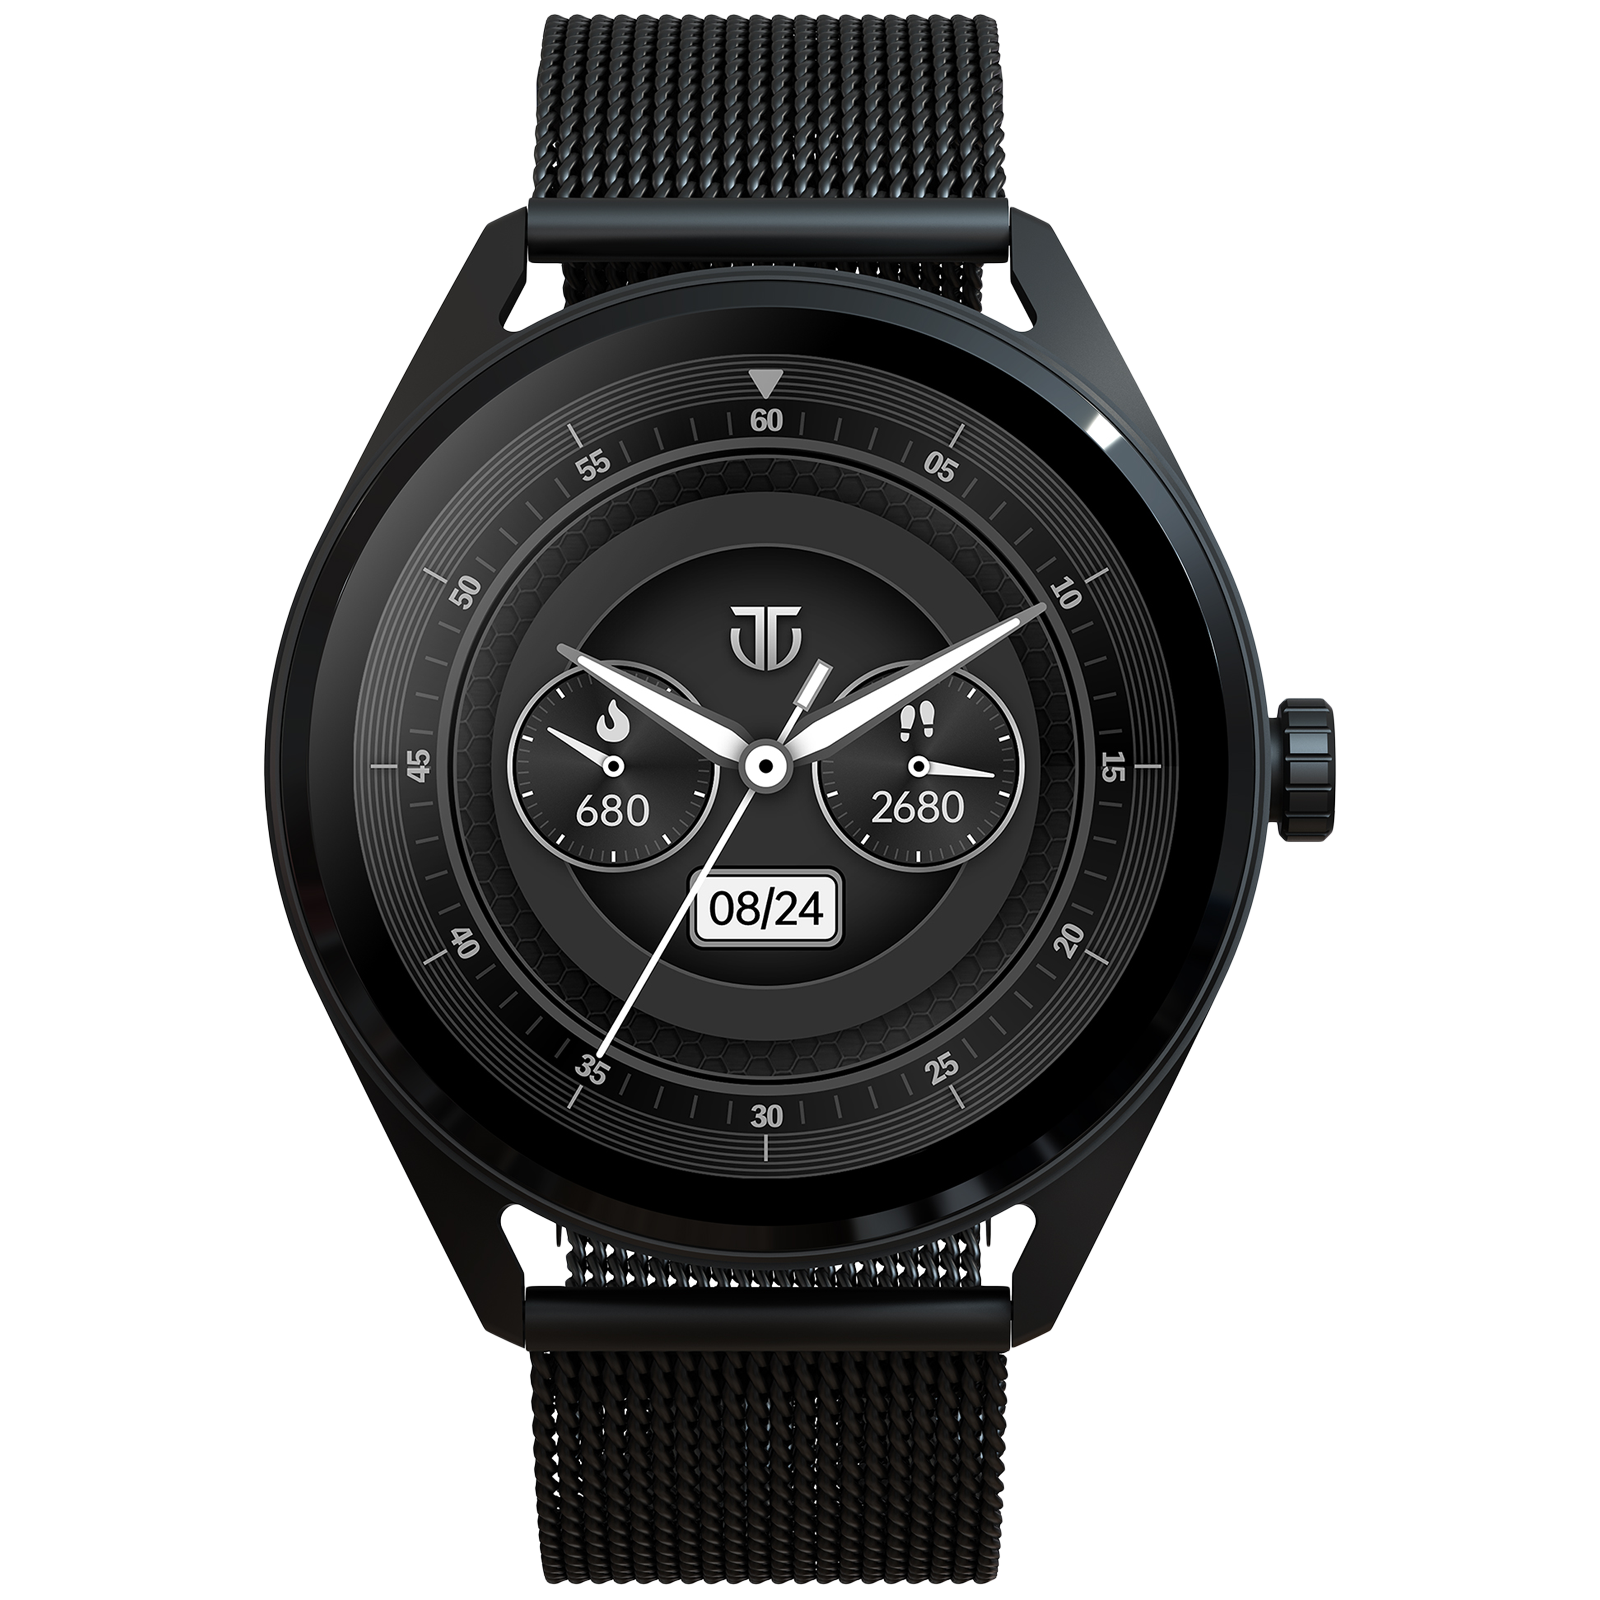 TITAN Crest Smartwatch with Bluetooth Calling (36.3mm AMOLED Display, IP68 Water Resistant, Black Mesh Strap)